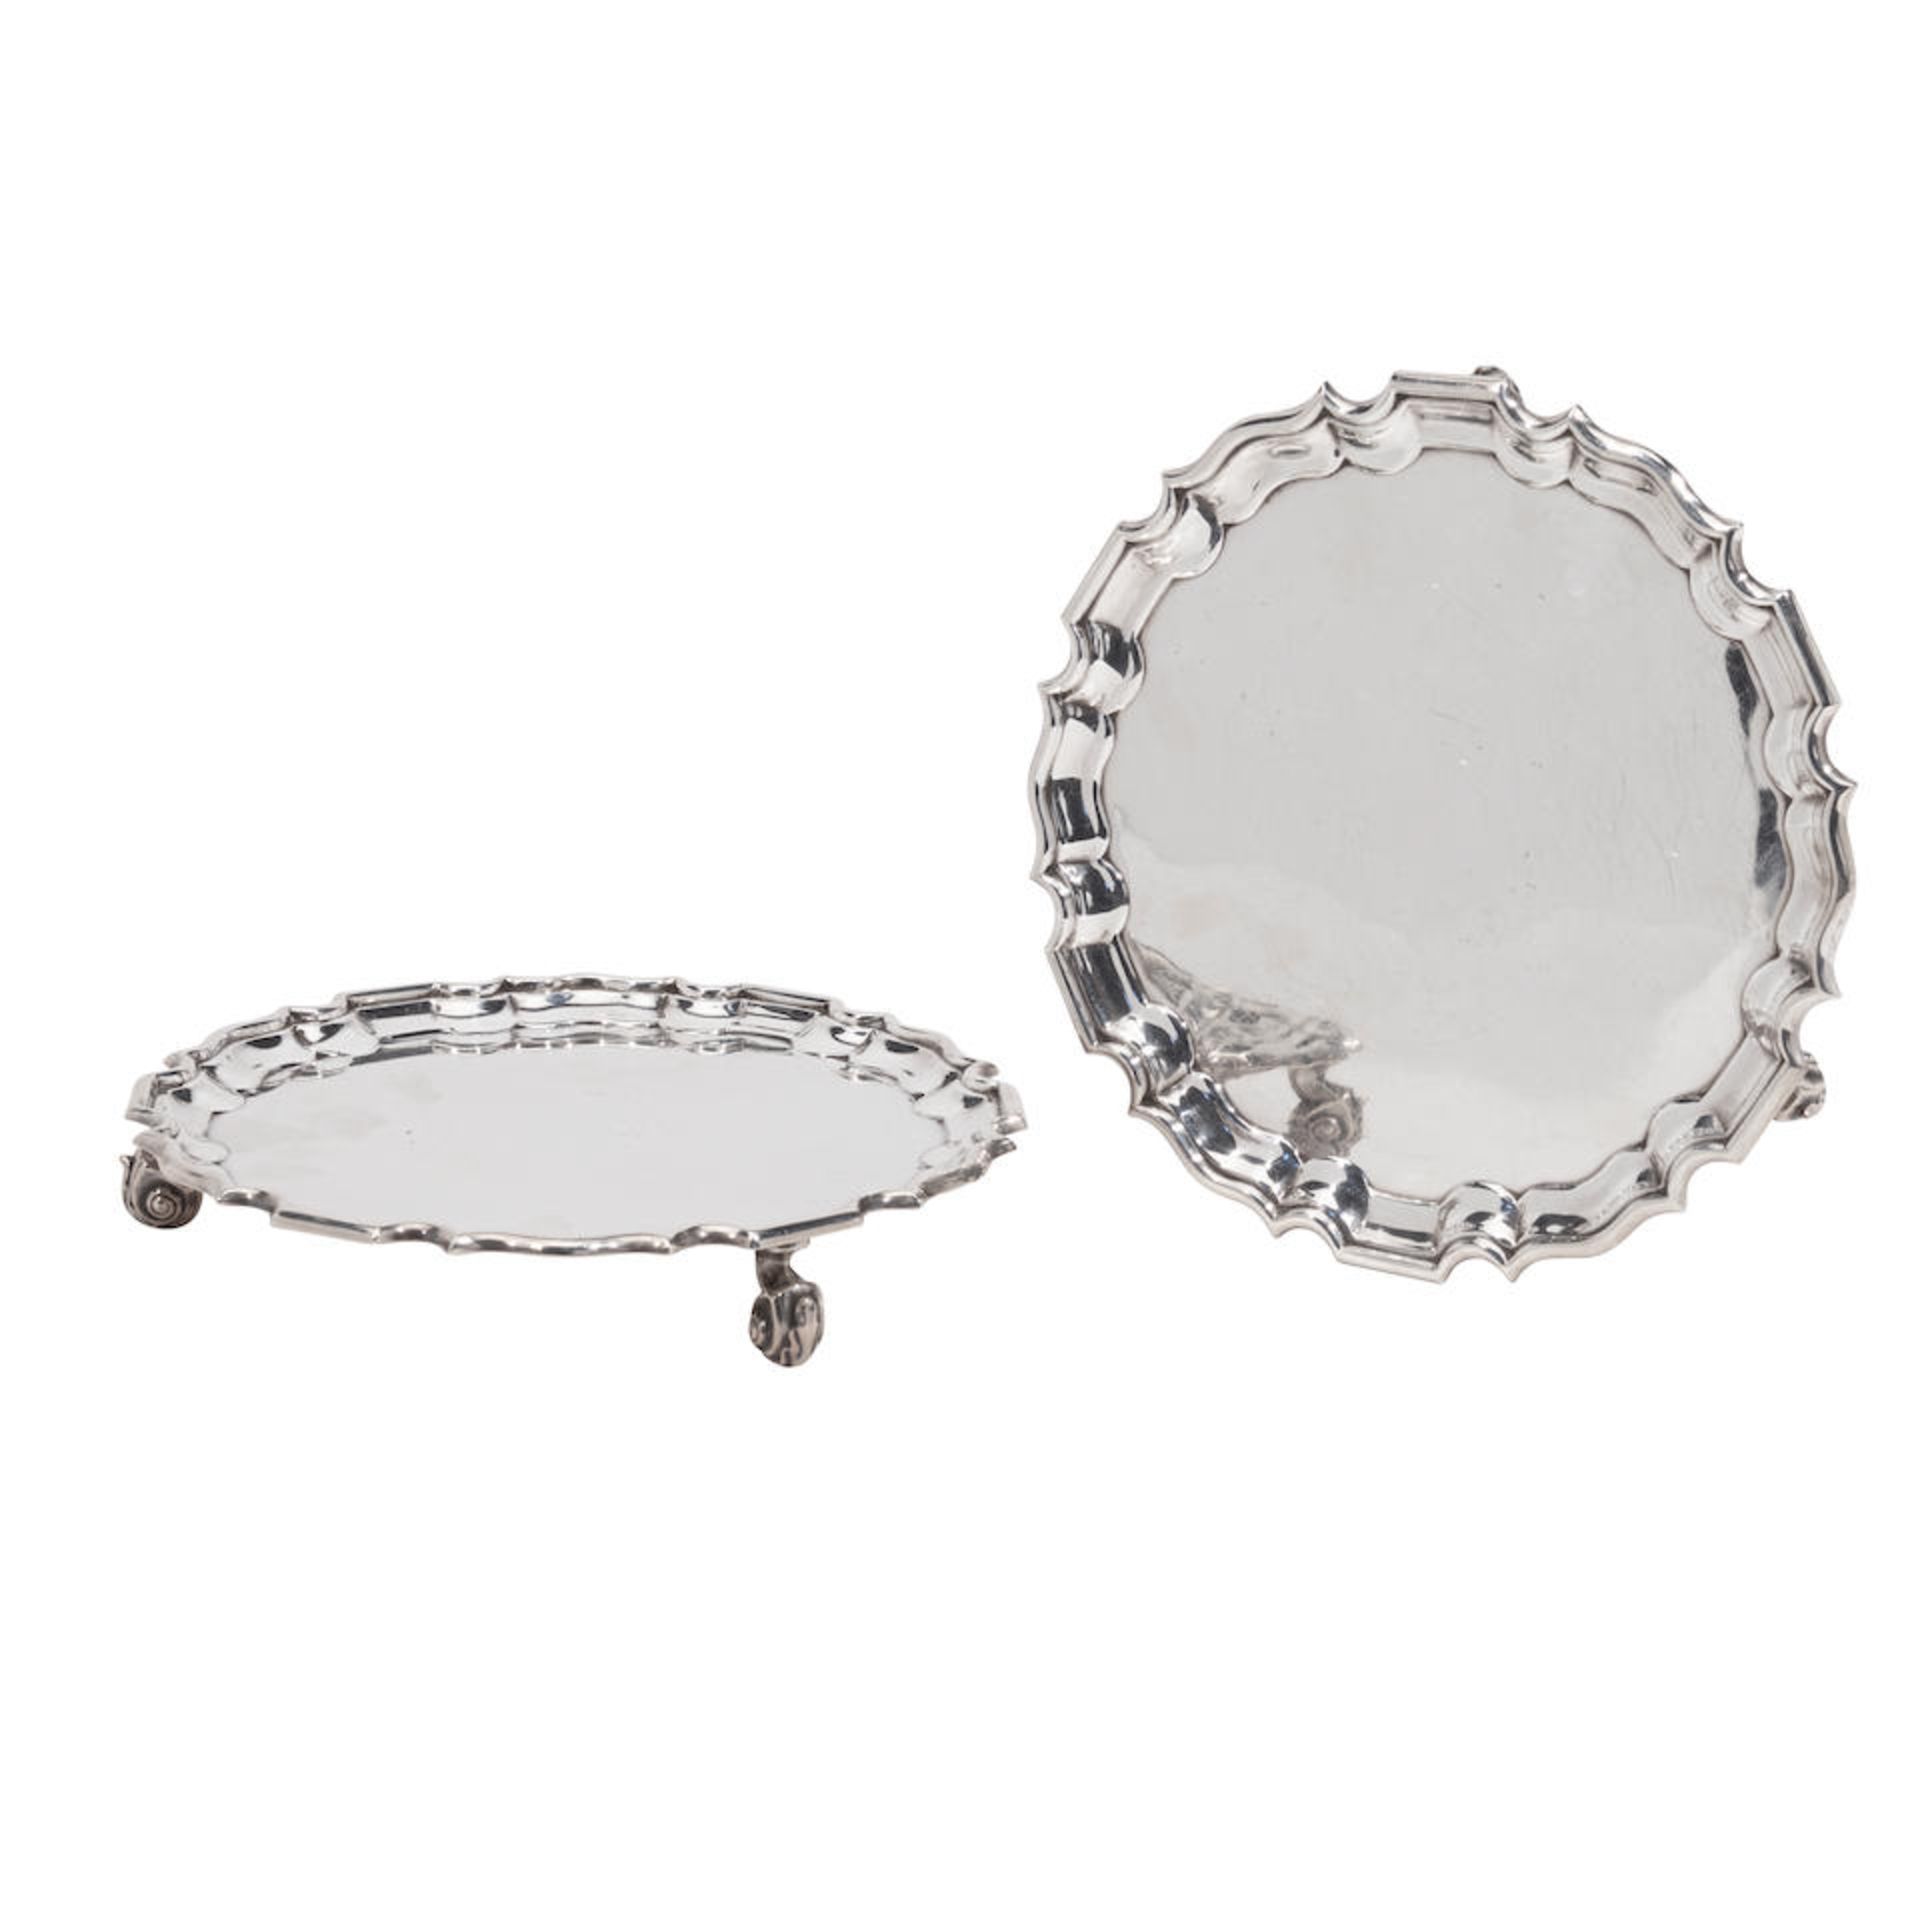 A MATCHED PAIR OF ENGLISH SILVER FOOTED SALVERS by various makers, 1930